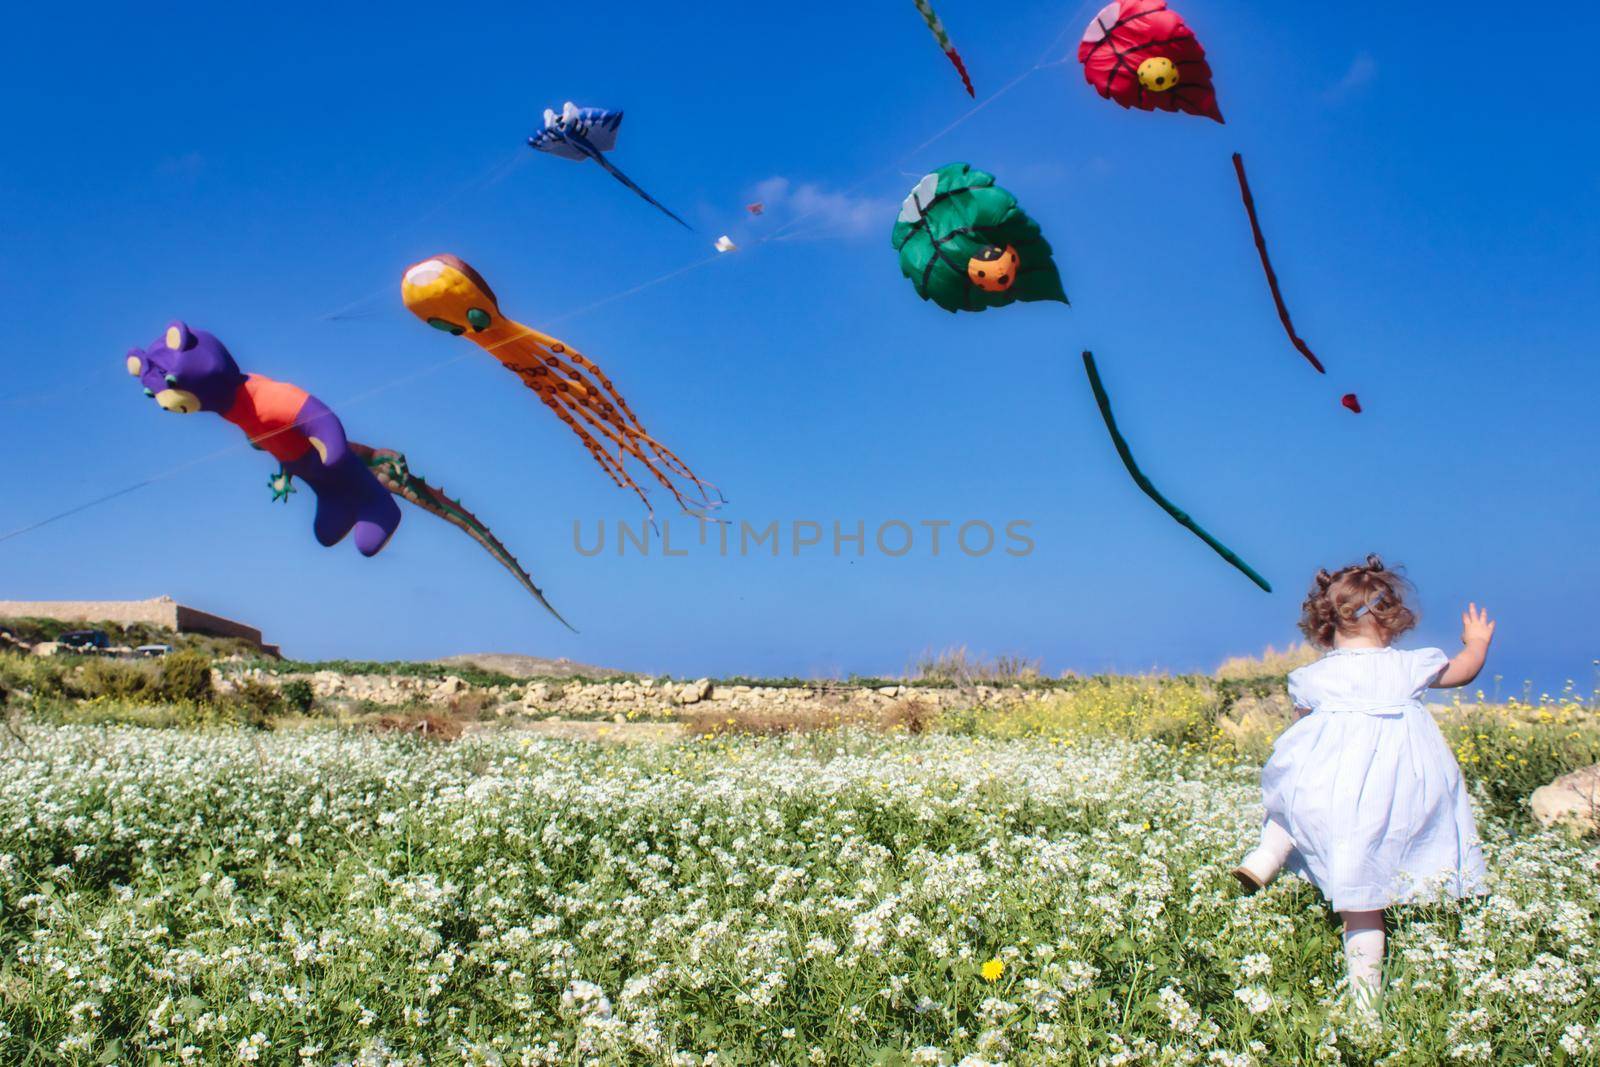 A little girl running through a field with kites flying against a clear blue sky by tennesseewitney